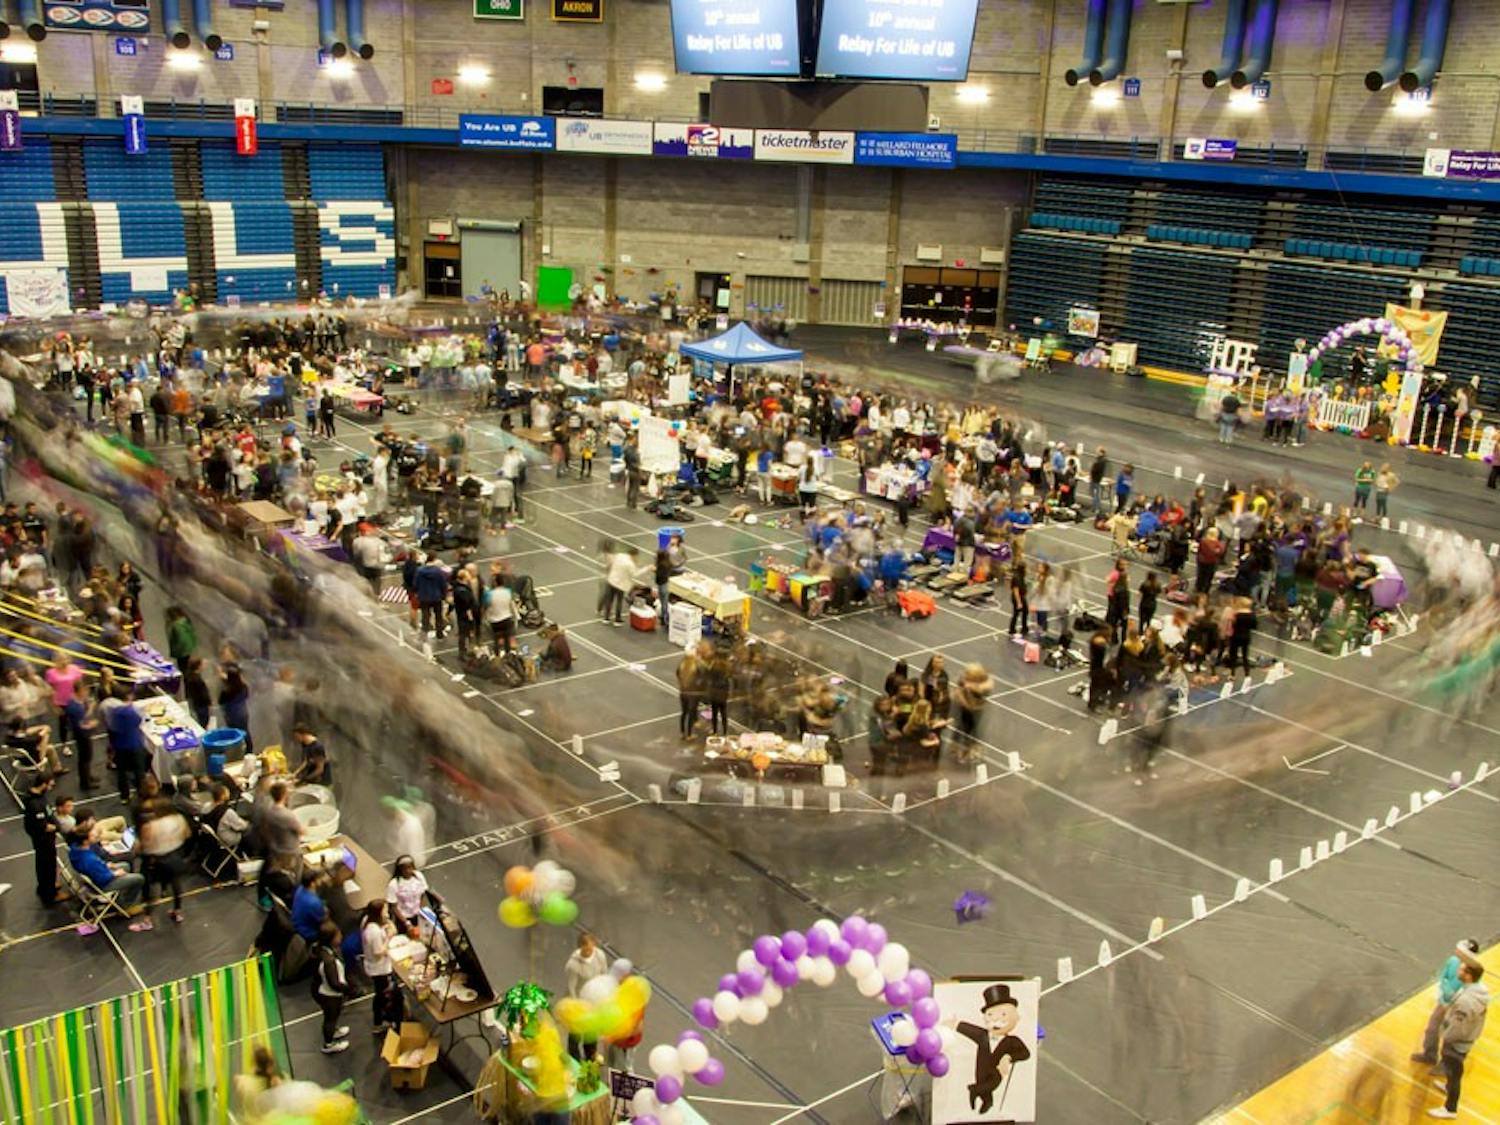 UB Relay for Life was held Friday in Alumni Arena. Over 84 teams and 1,486 participants raised $52,930.15 for cancer research. Throughout the 12-hour event, participants walked around the track and visited tables with decorations, candy and games set up throughout Alumni.